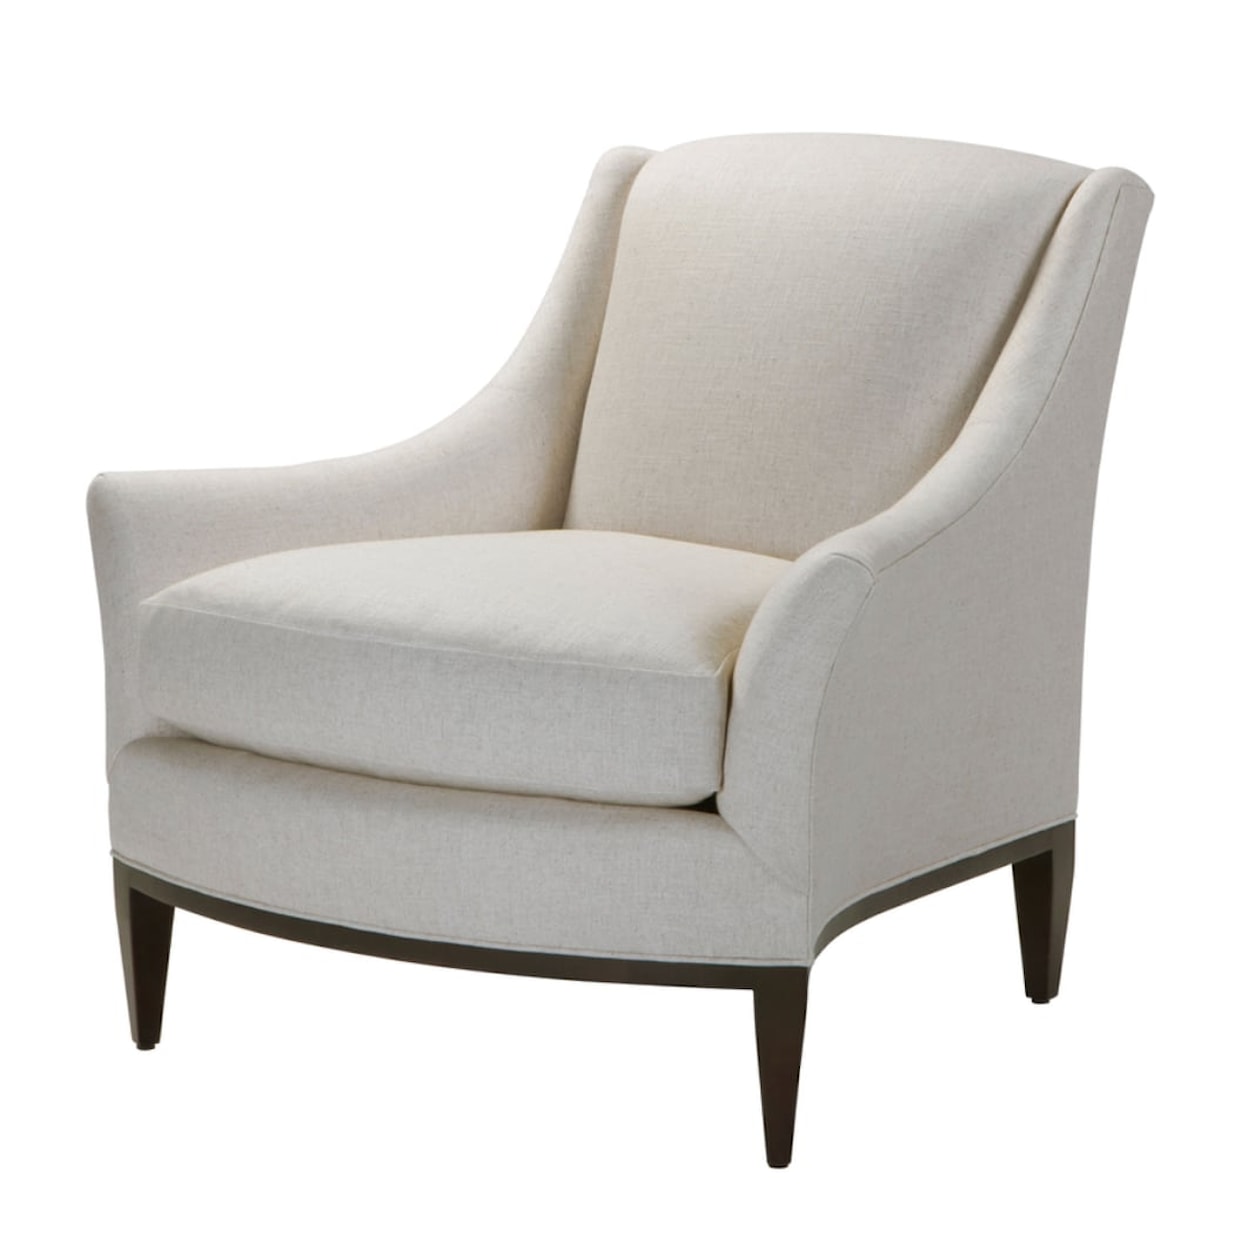 Theodore Alexander Upholstery Riley Tight Back Chair